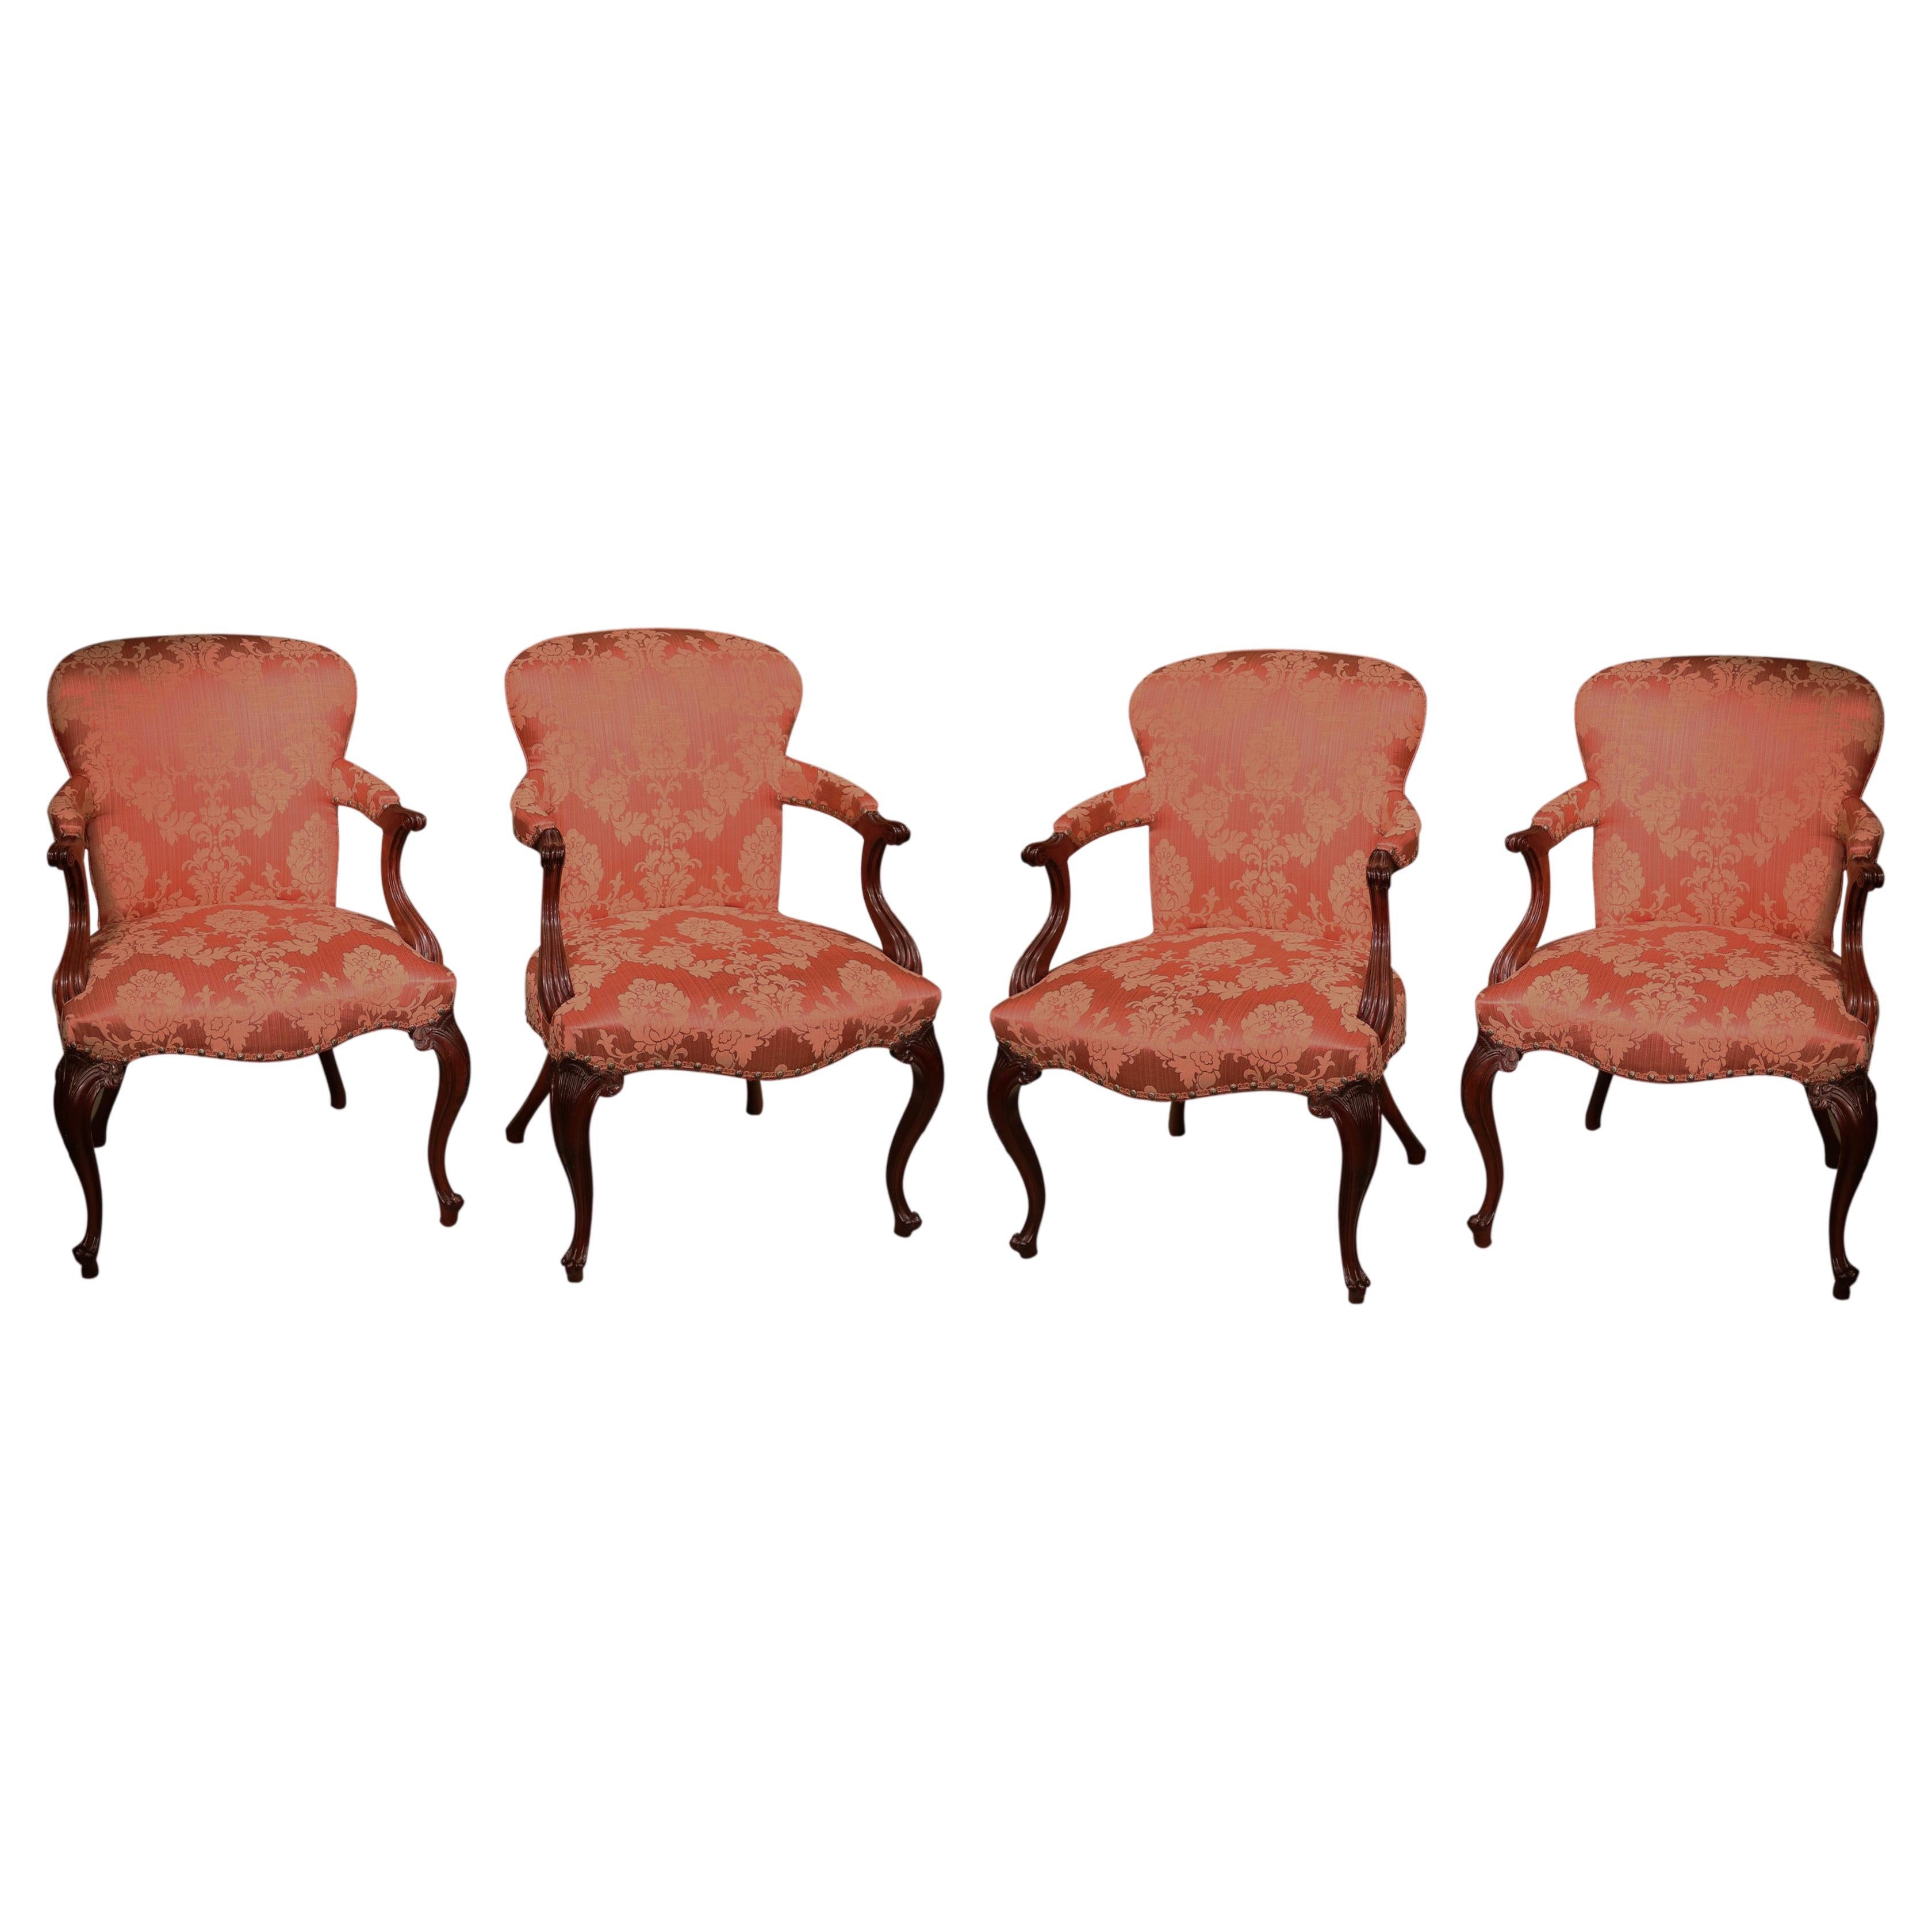 Antique set of four Hepplewhite period carved mahogany stuffed back armchairs For Sale